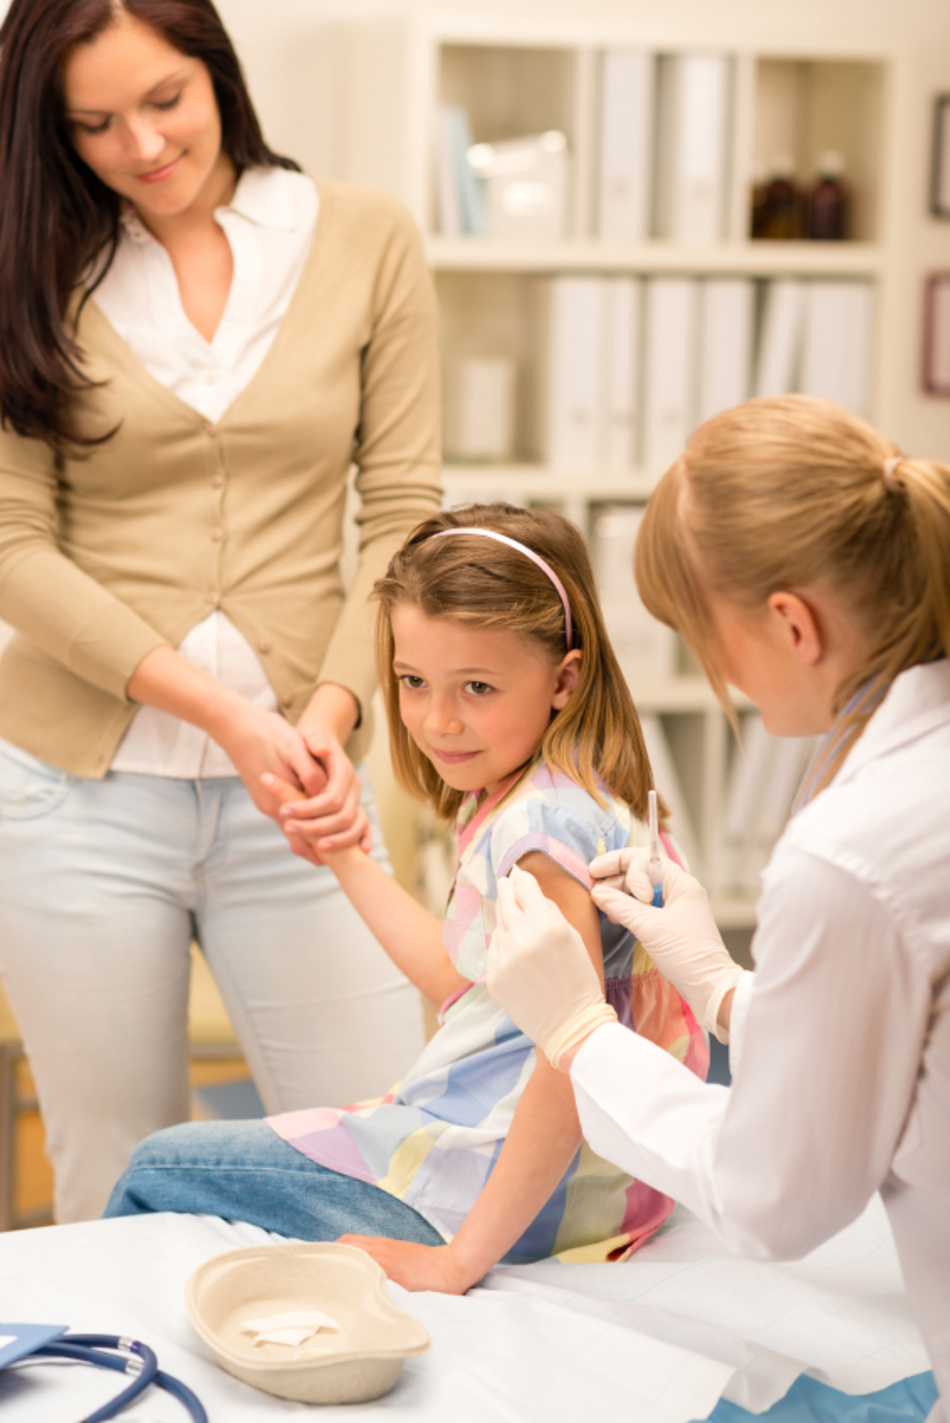 How to Have a Productive Conversation About Vaccinations With Your Pediatrician